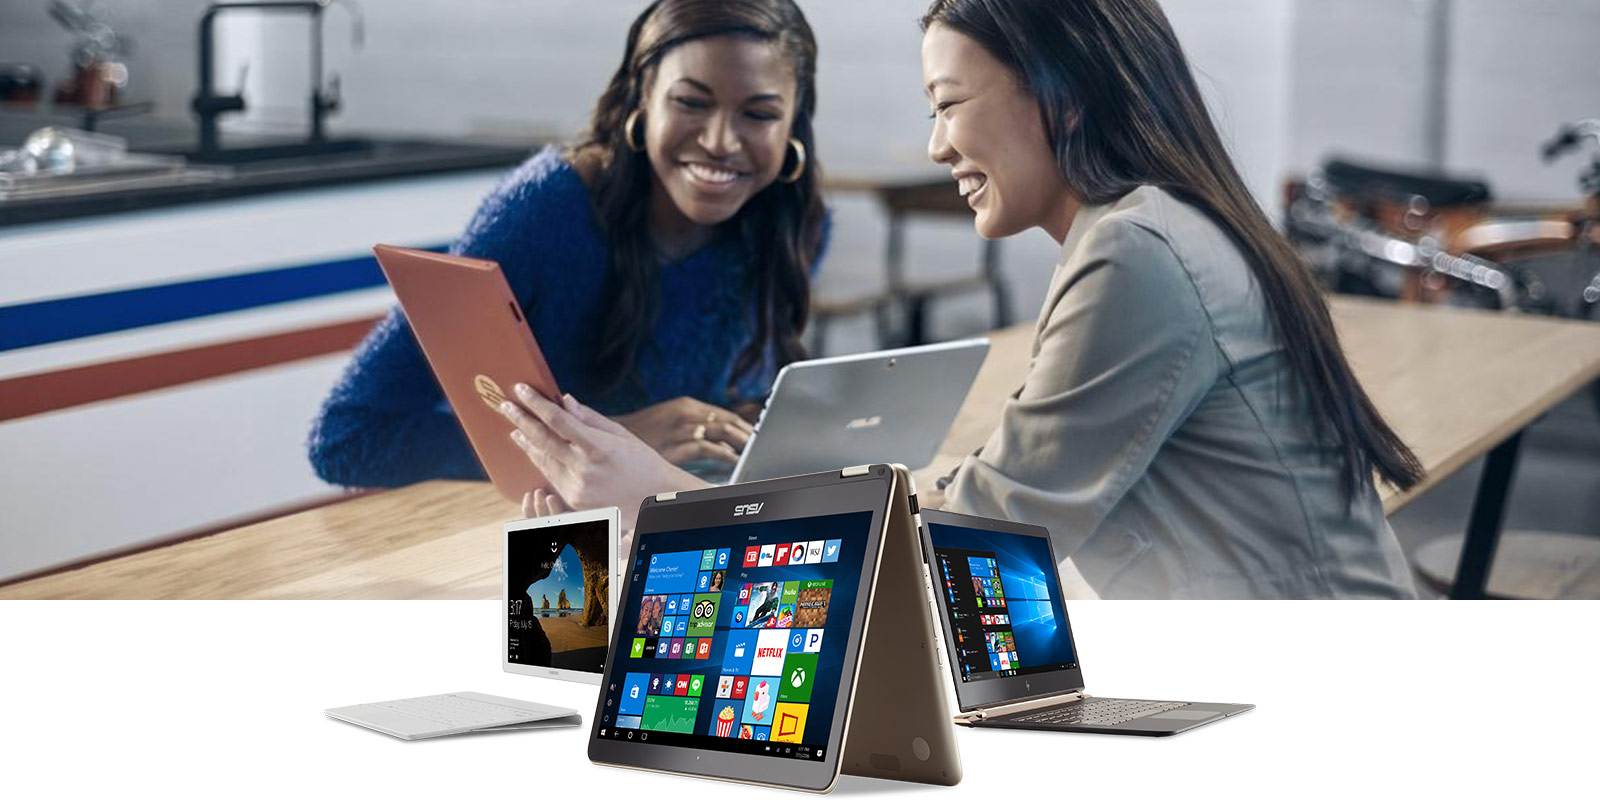 Windows 10 PCs and tablets